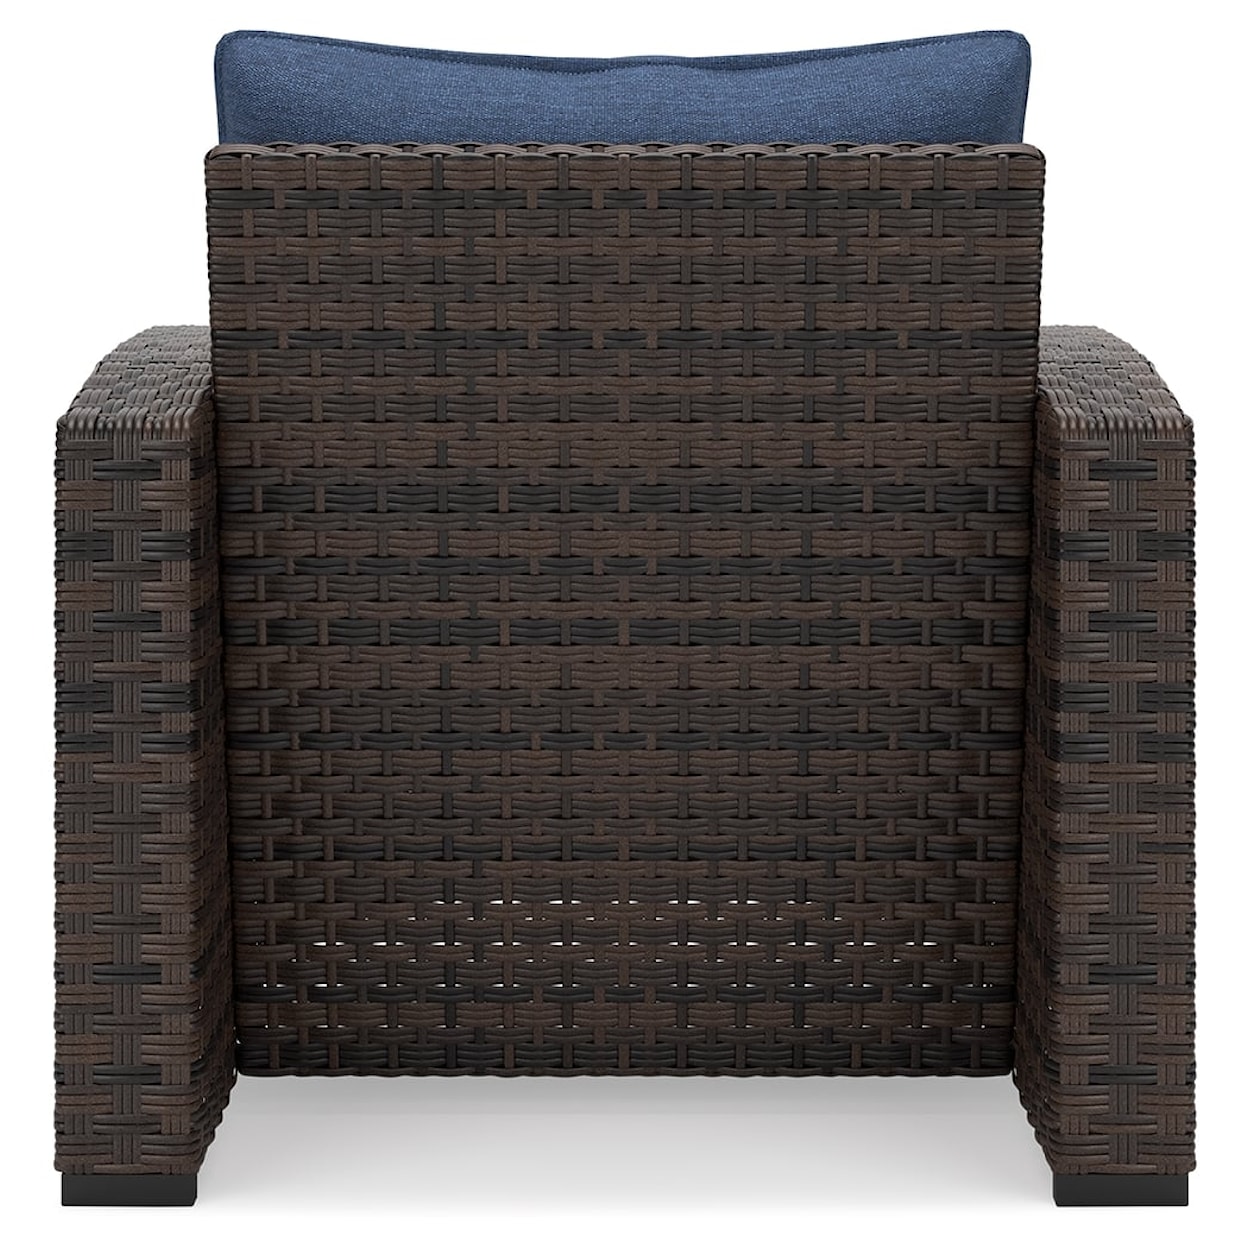 Signature Design Windglow Outdoor Lounge Chair with Cushion